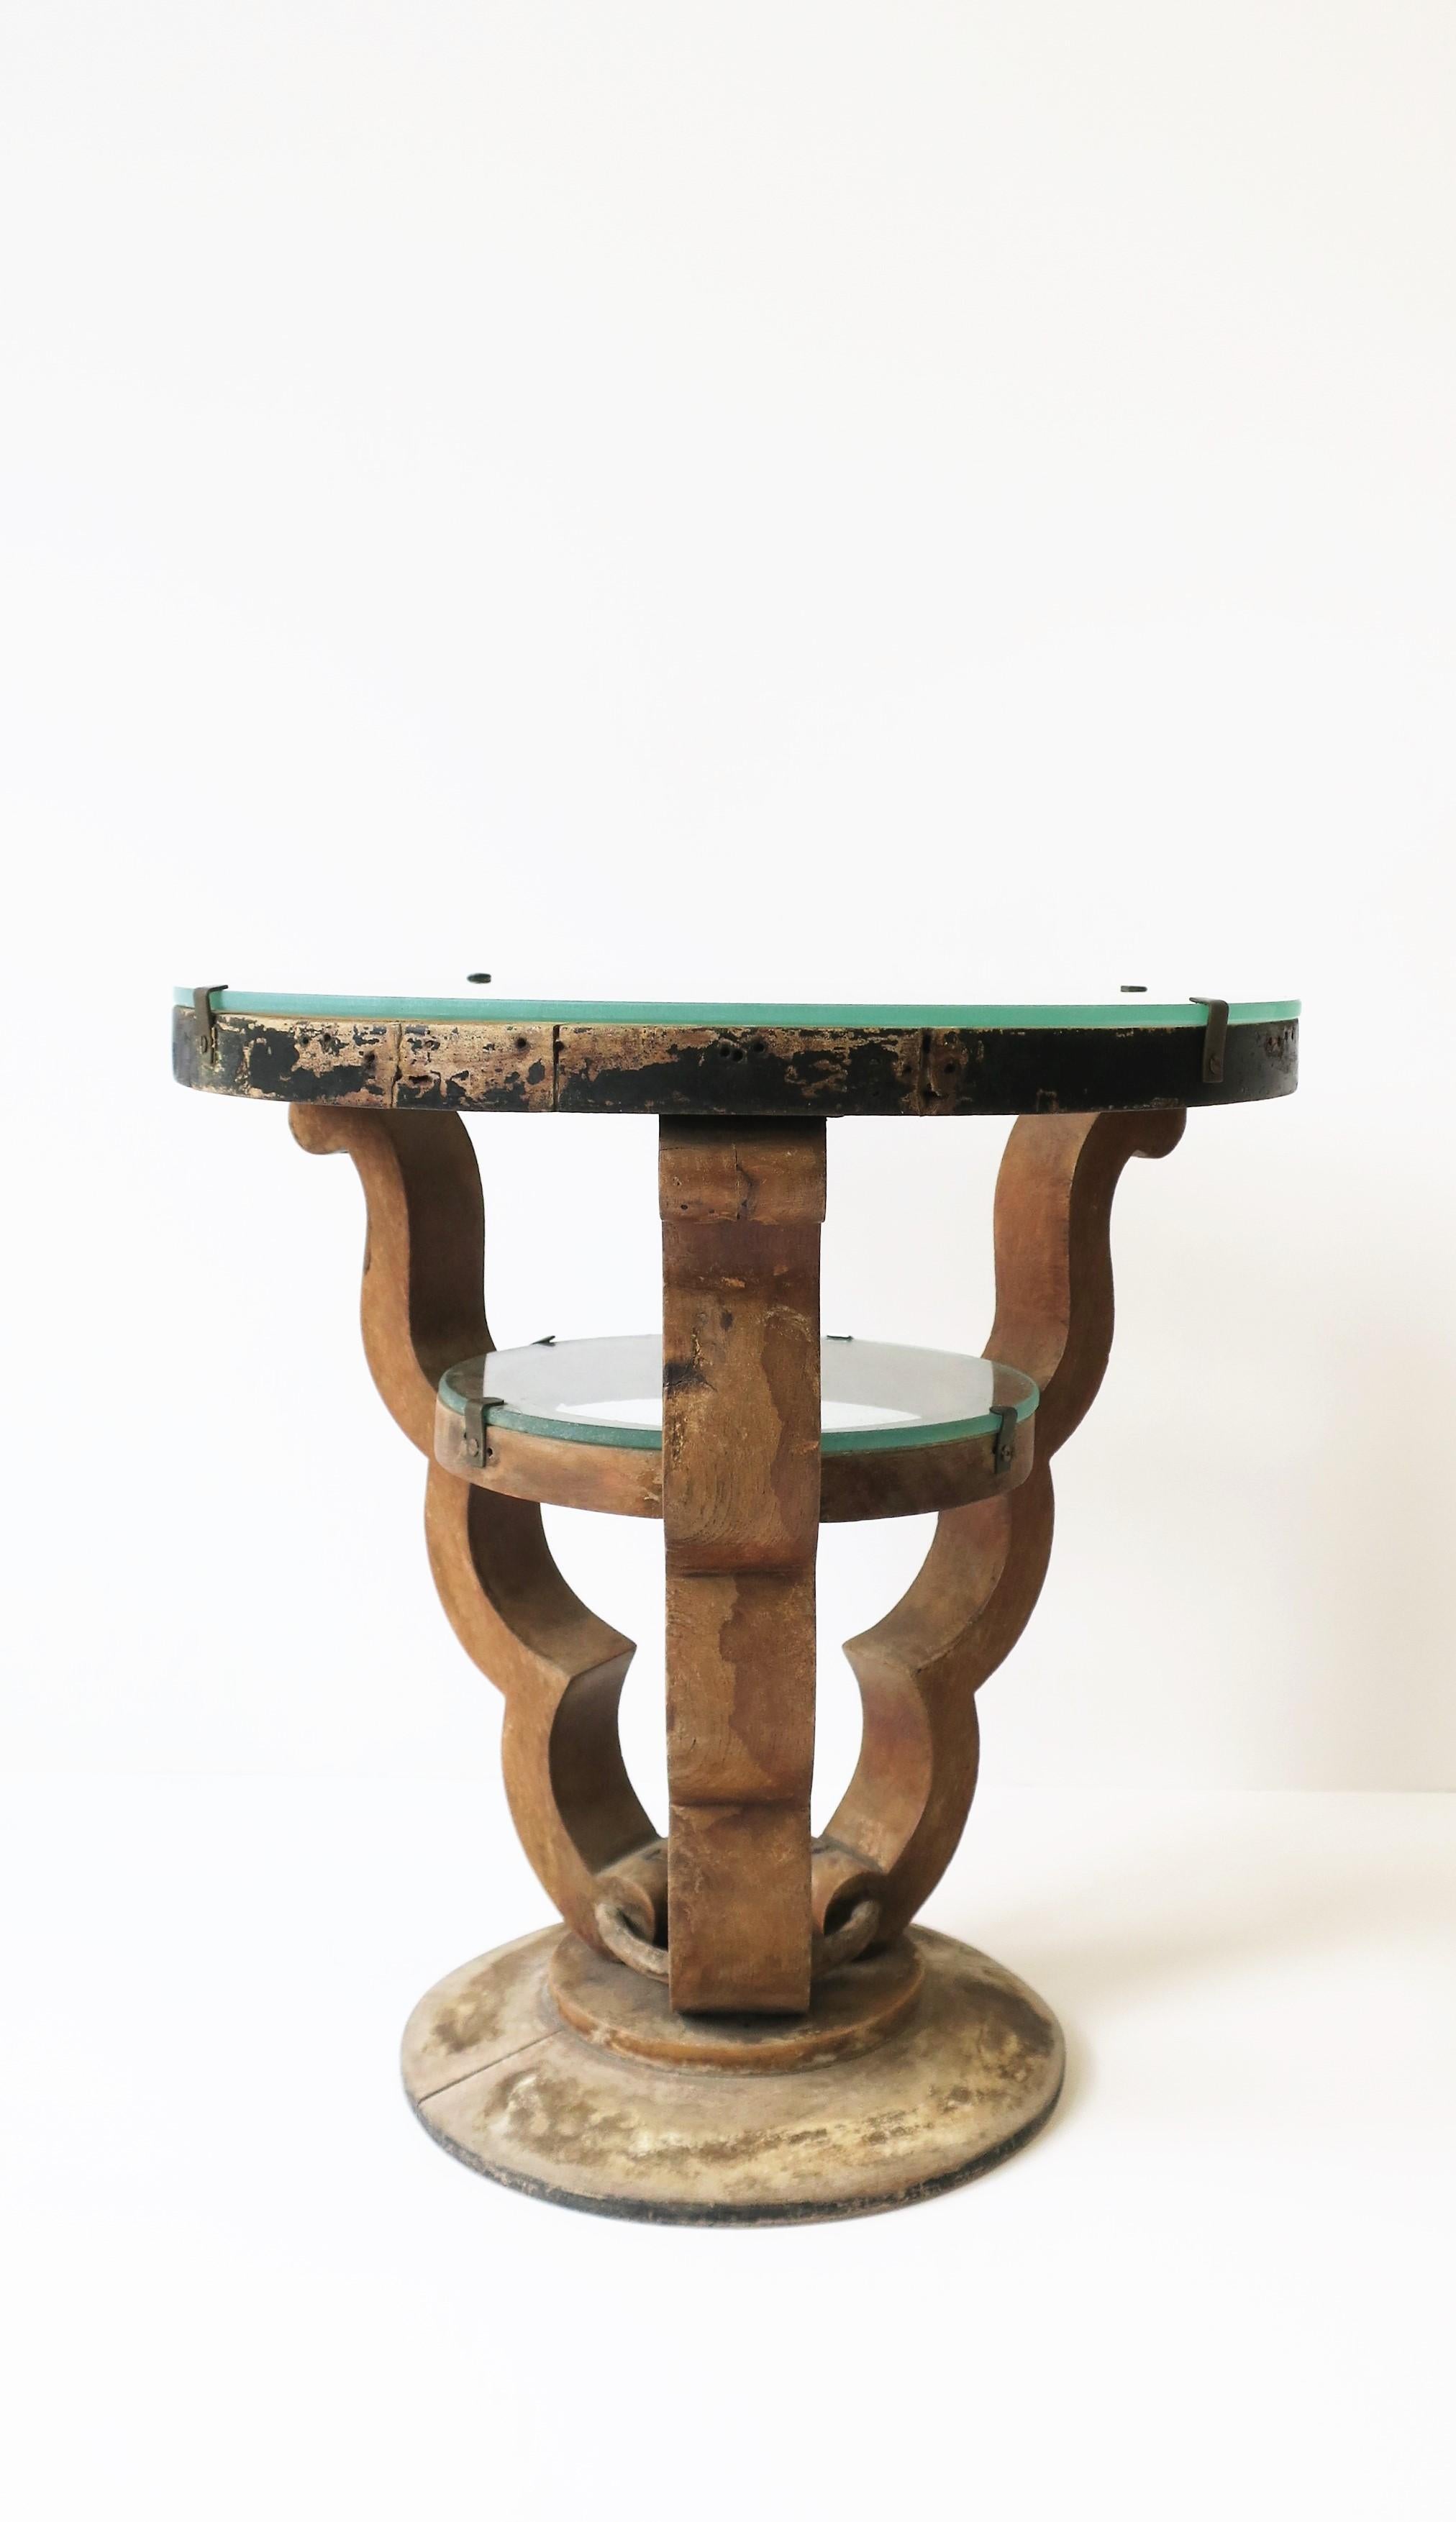 A small rustic round wood and glass side or drinks table, in the Art Deco style, circa late-20th century. This side or drinks table has all the hallmarks of Art Deco design including tables' round cut out top, round interior shelf/secondary table